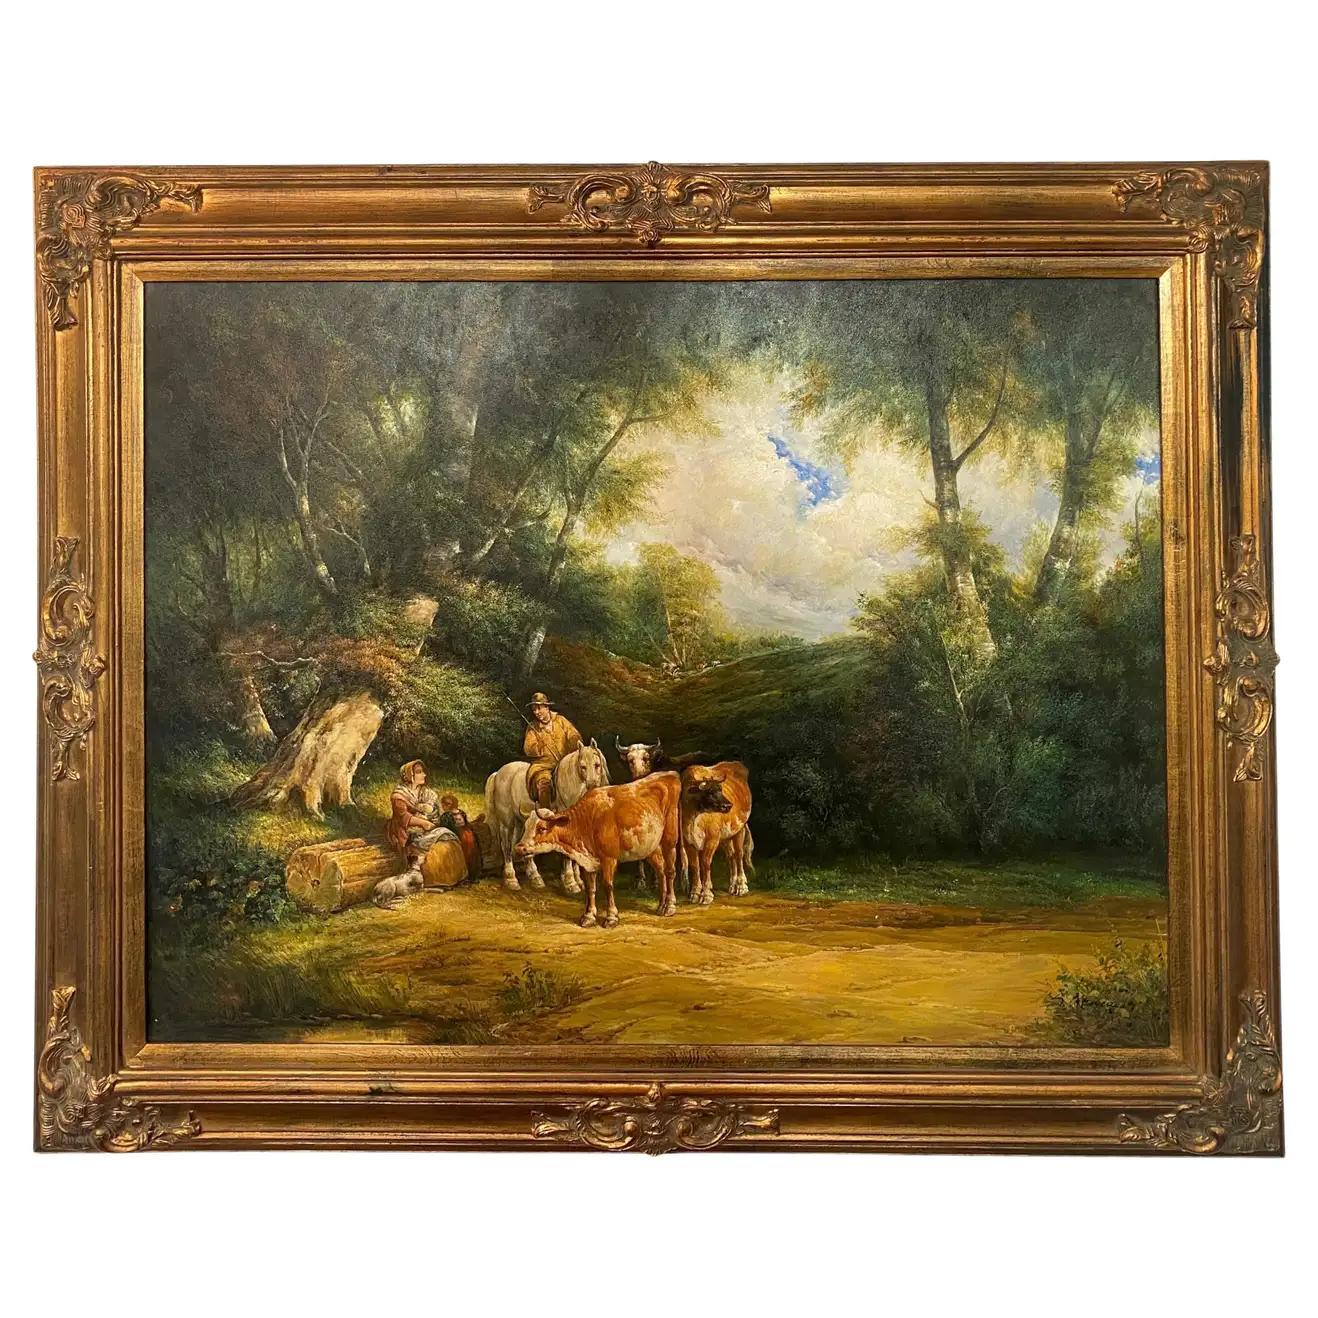 Julius Paul Junghanns Landscape Painting - Large Impressionistic Oil on Canvas Painting of Farmers with Cattle, Framed